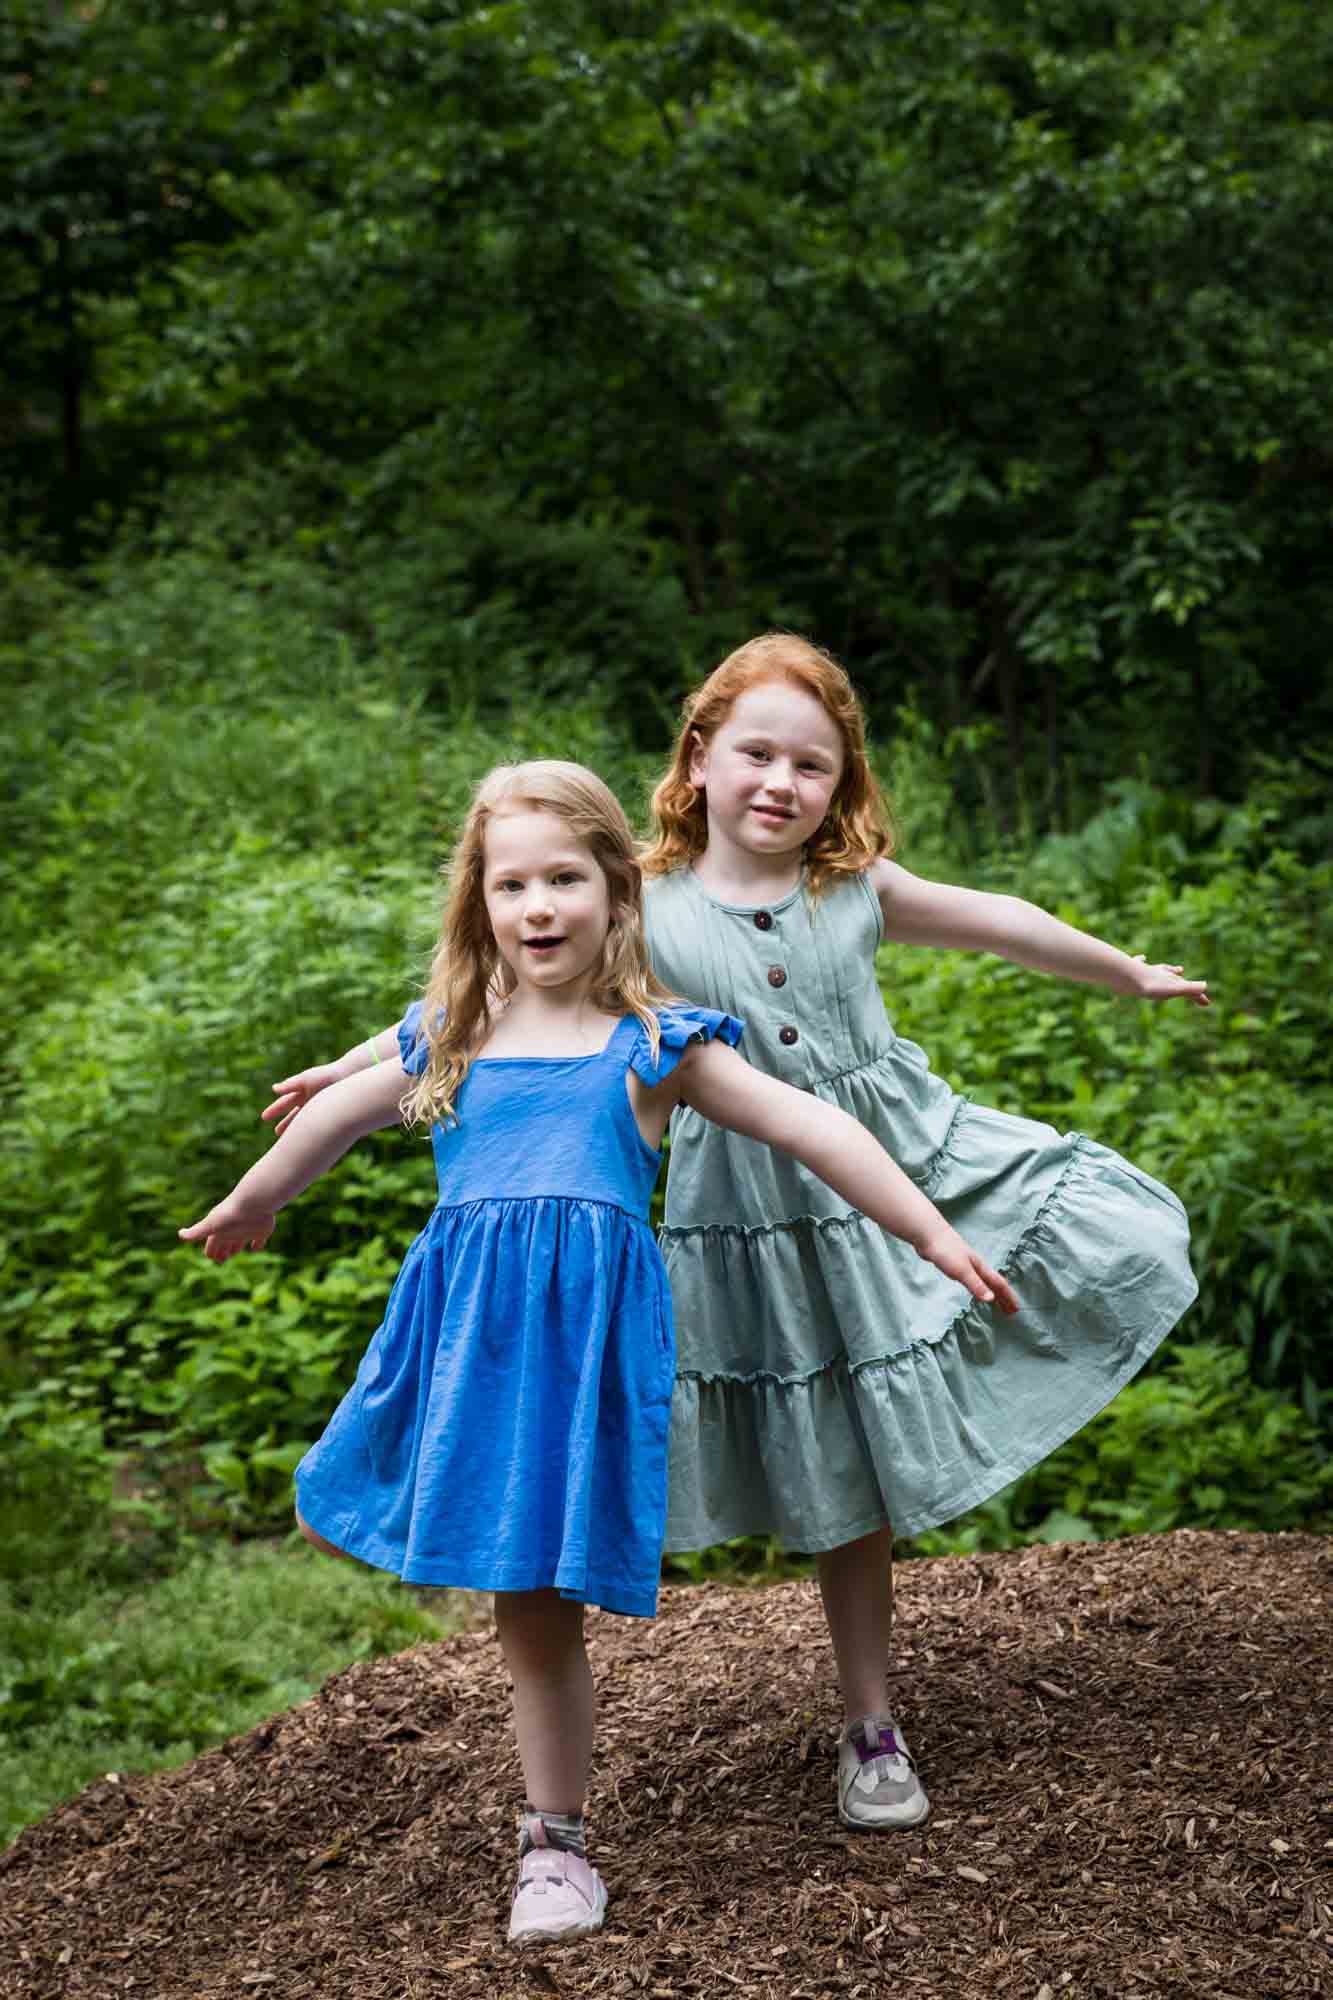 Two little girls wearing blue dresses dancing on mulch pile in front of trees during a Central Park family portrait session